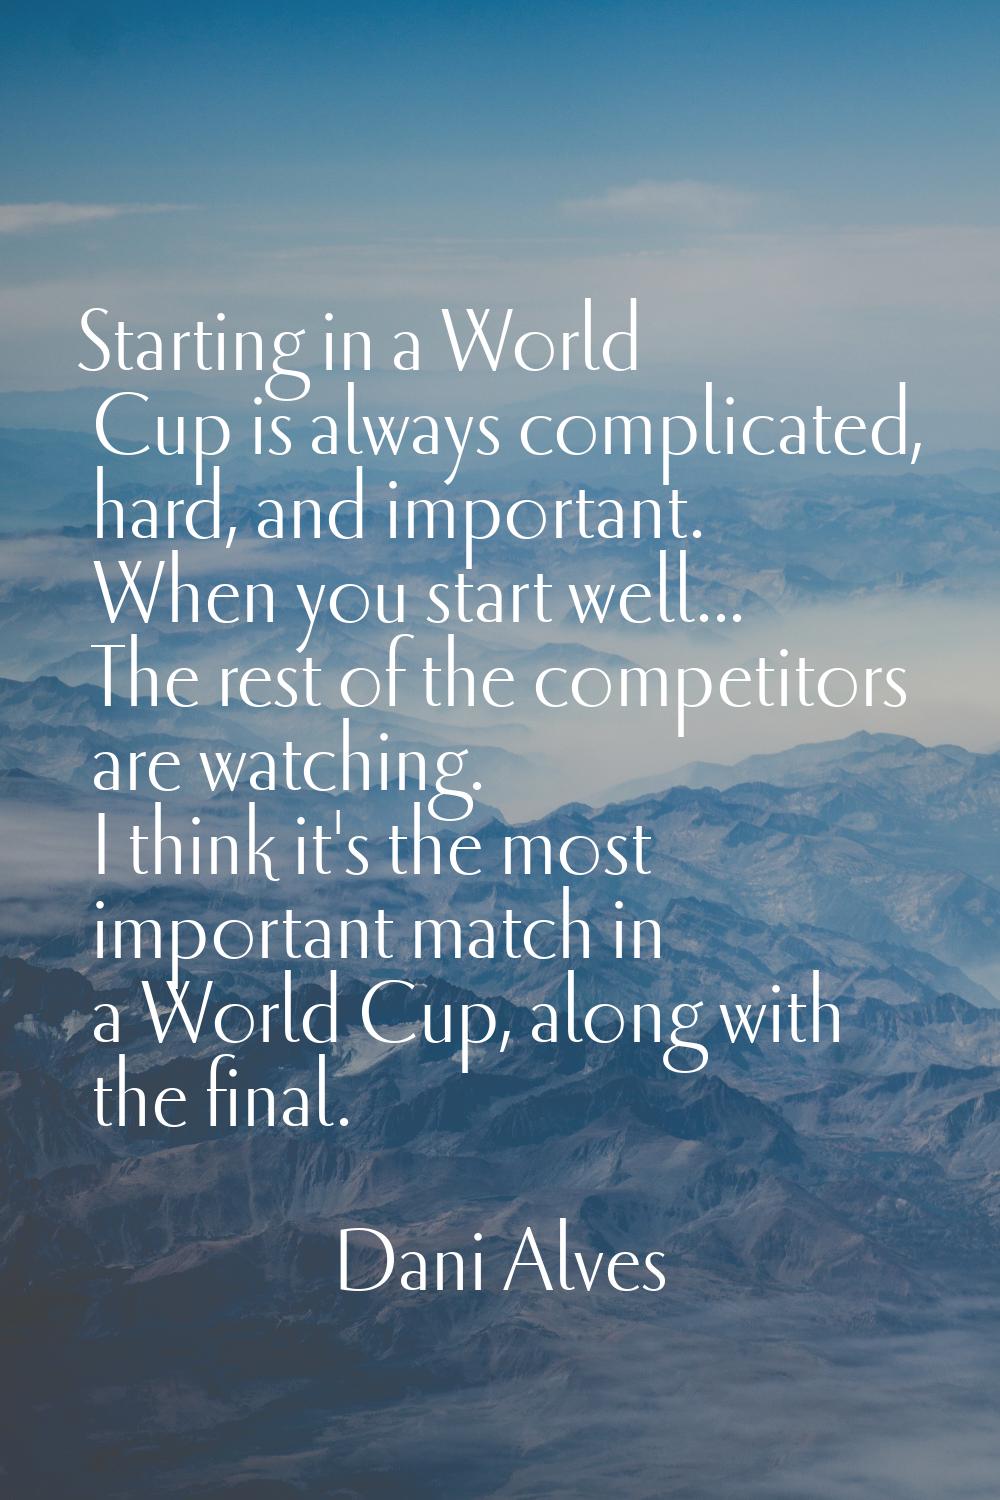 Starting in a World Cup is always complicated, hard, and important. When you start well... The rest